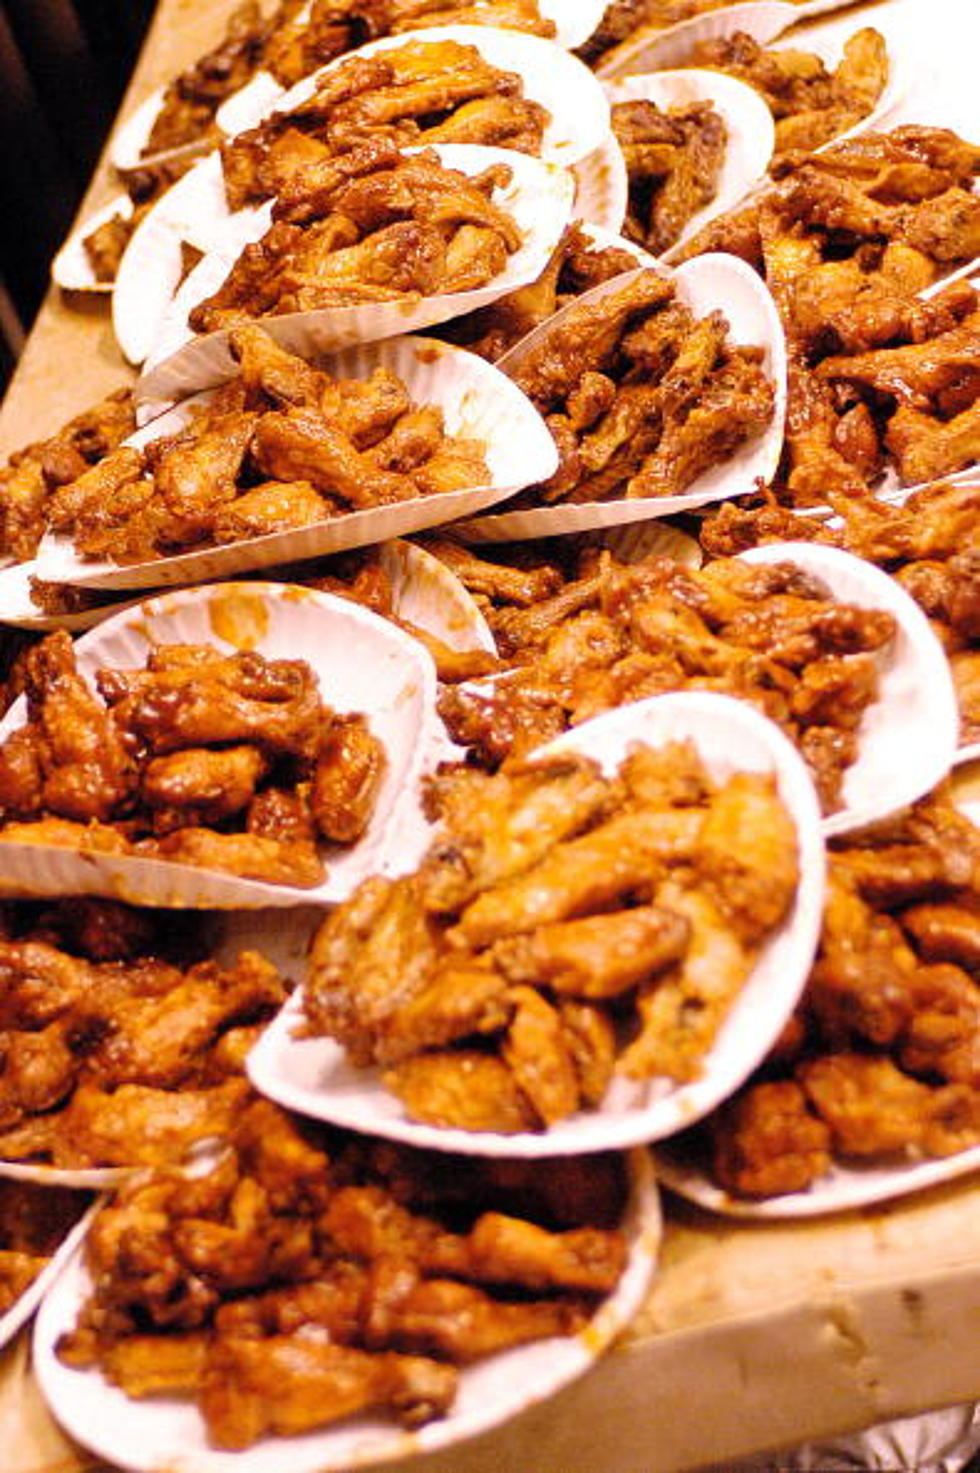 Bar Bill Tavern offers free wings for a year